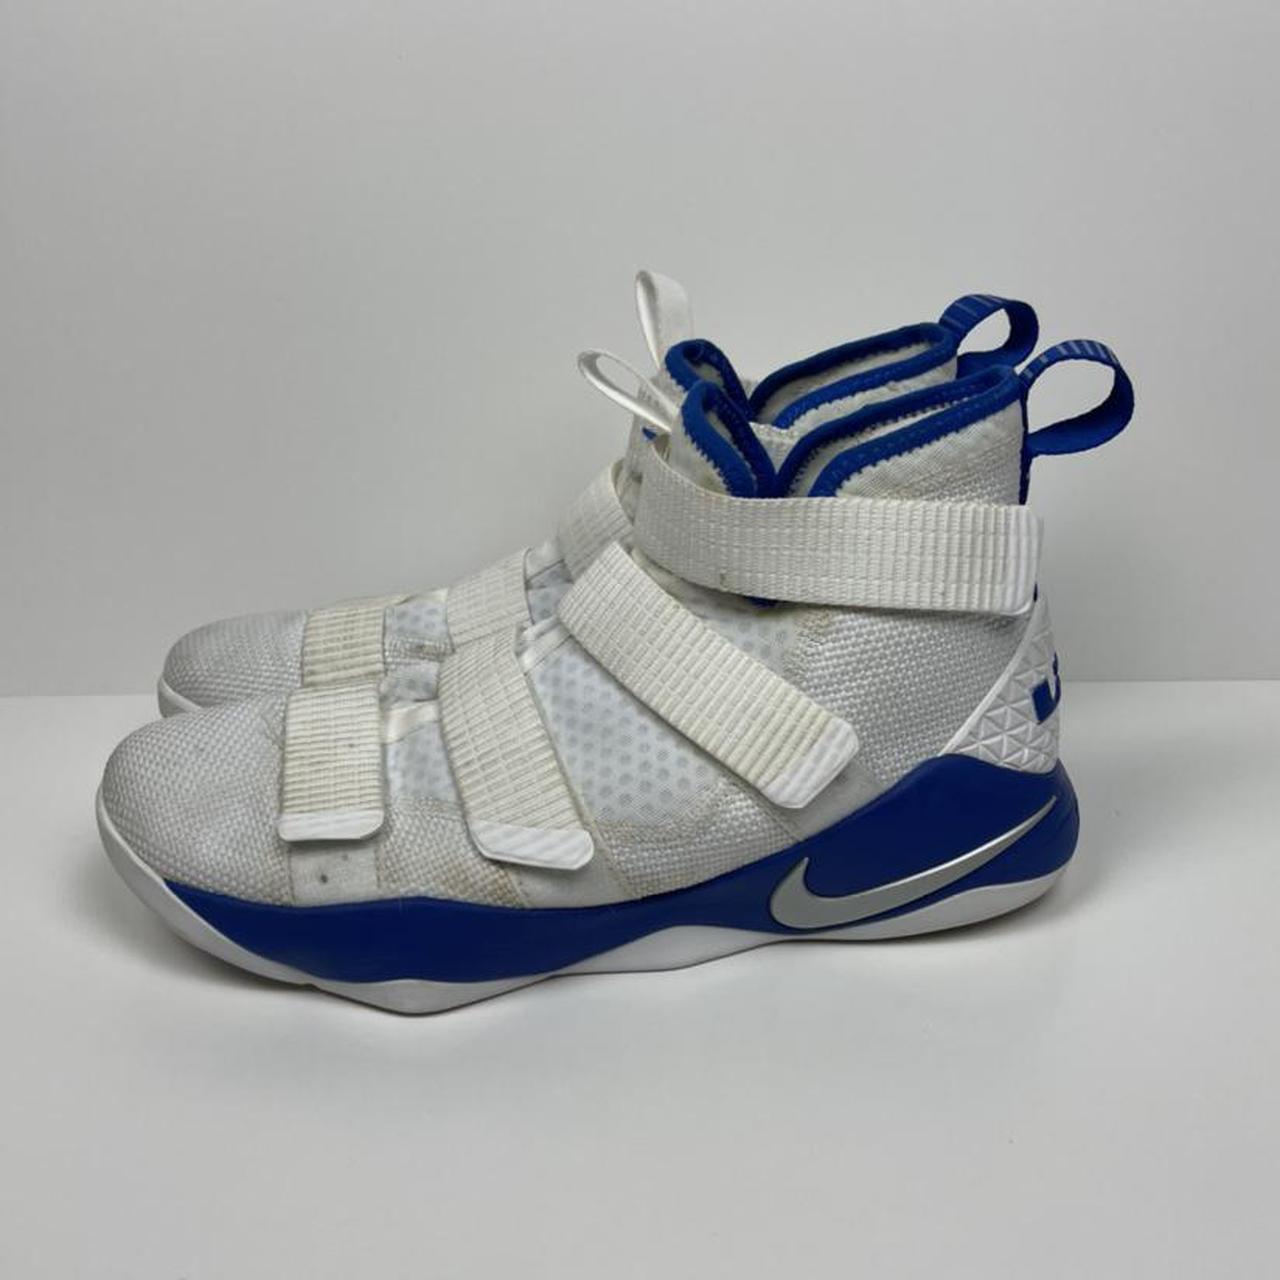 Product Image 2 - Nike Lebron James Soldier 11